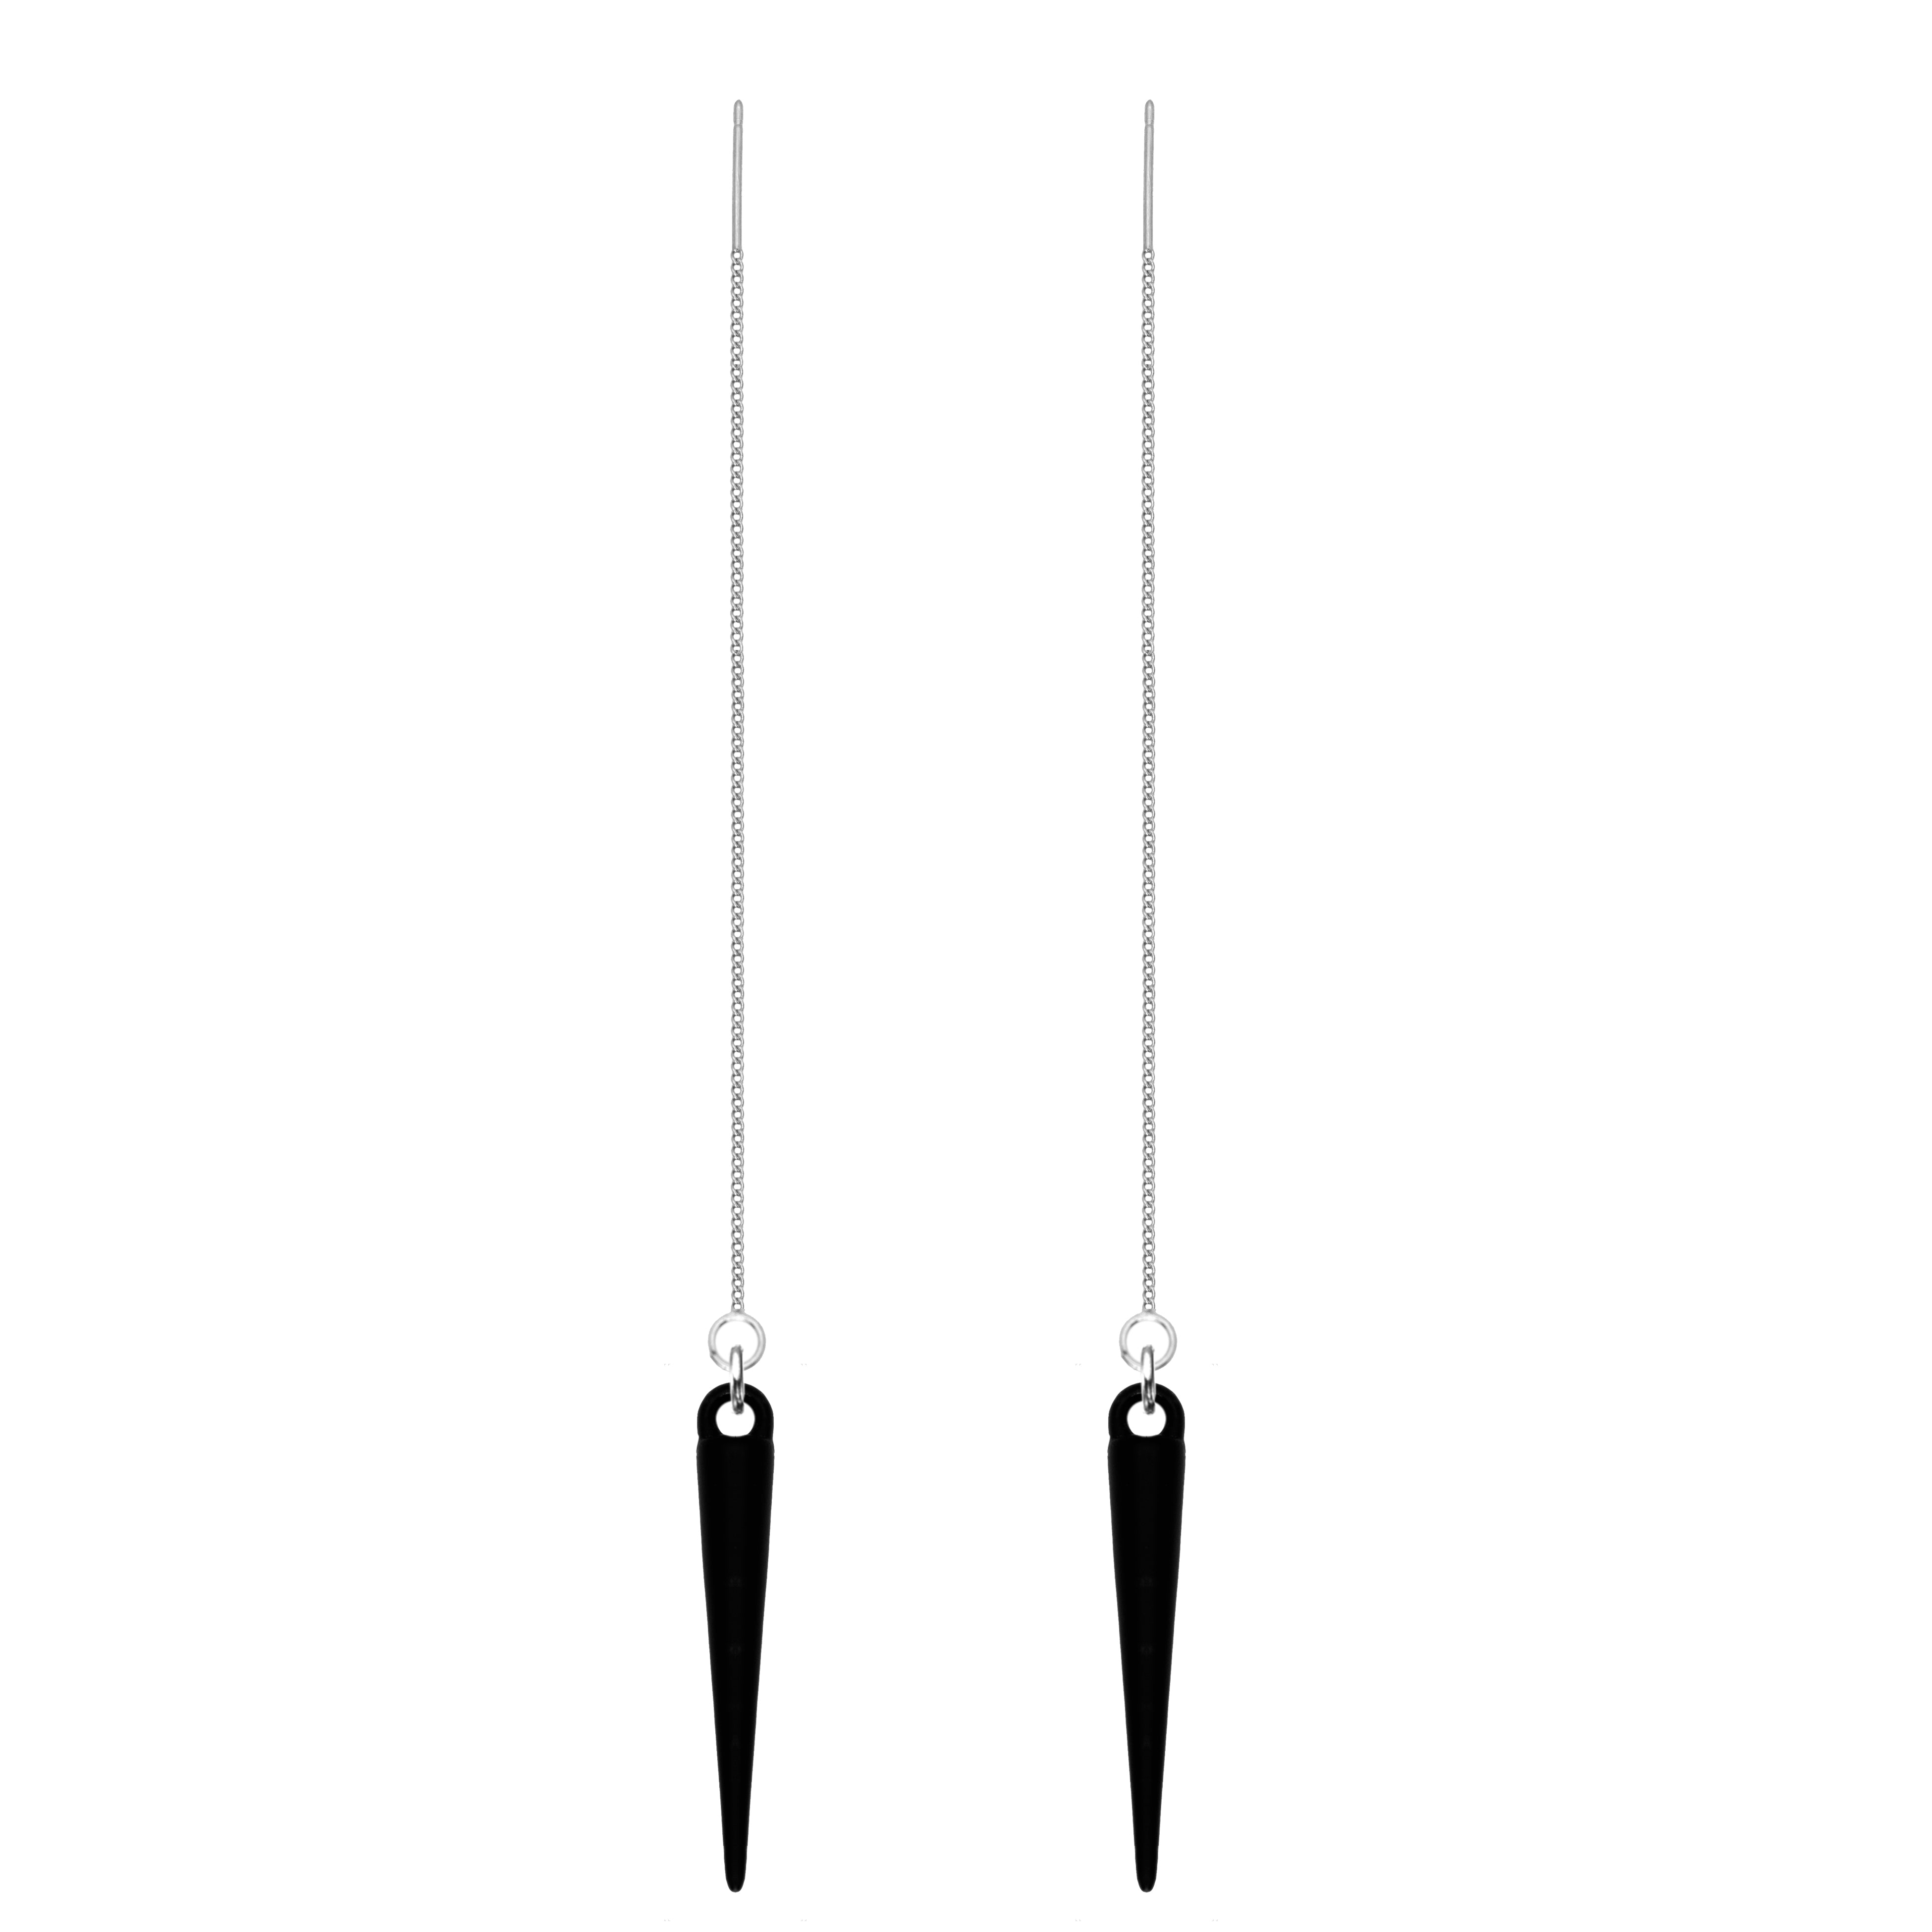 stainless steel threader earrings with spikes